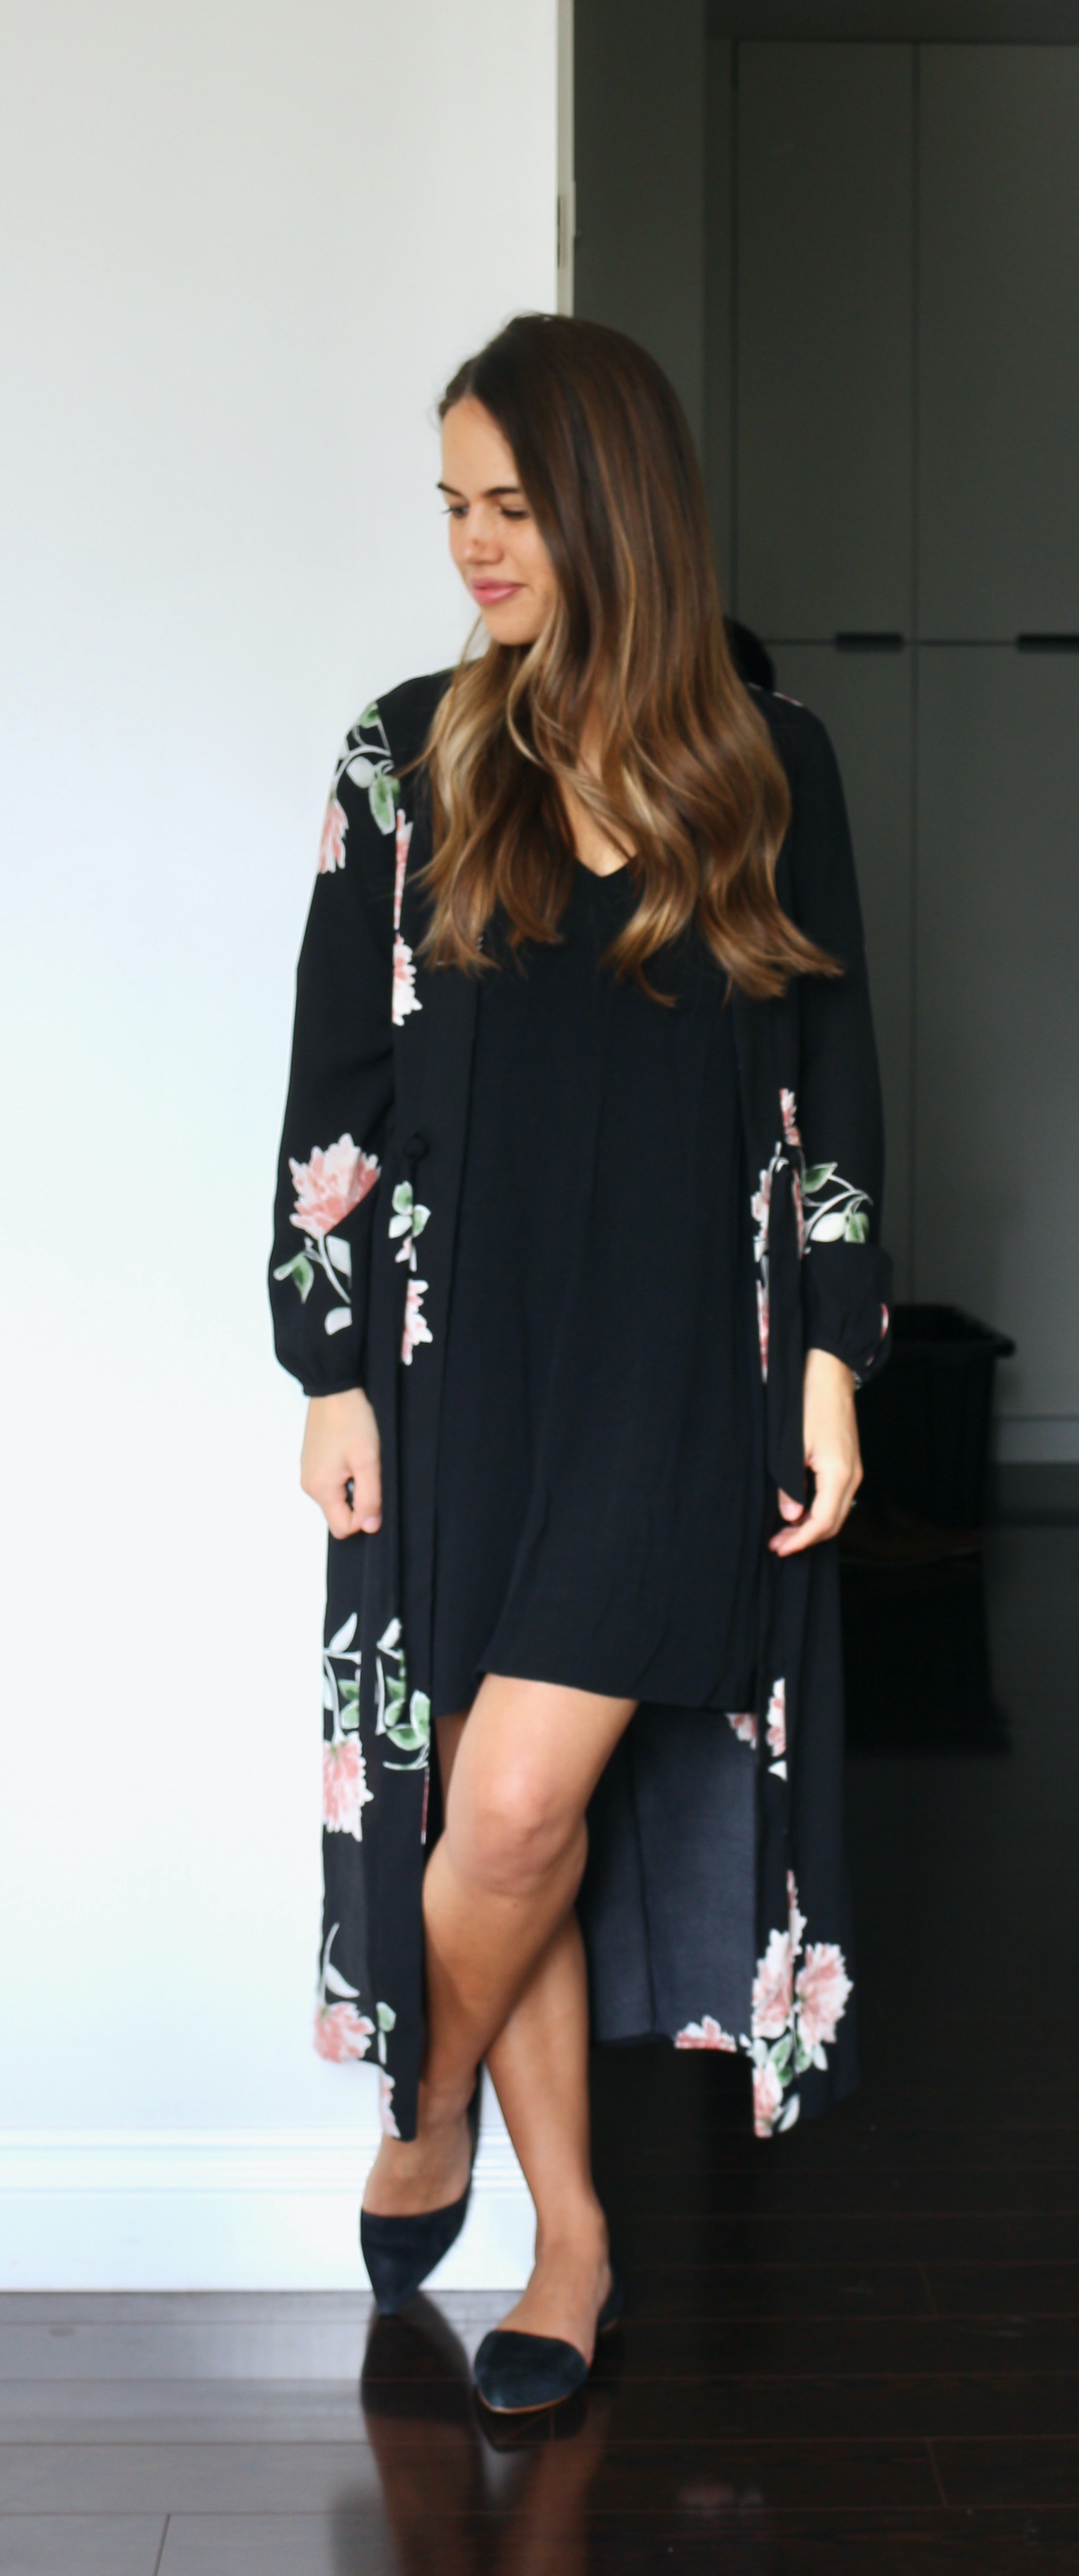 Jules in Flats - V-Neck Shift Dress with Kimono (Business Casual Workwear on a Budget)